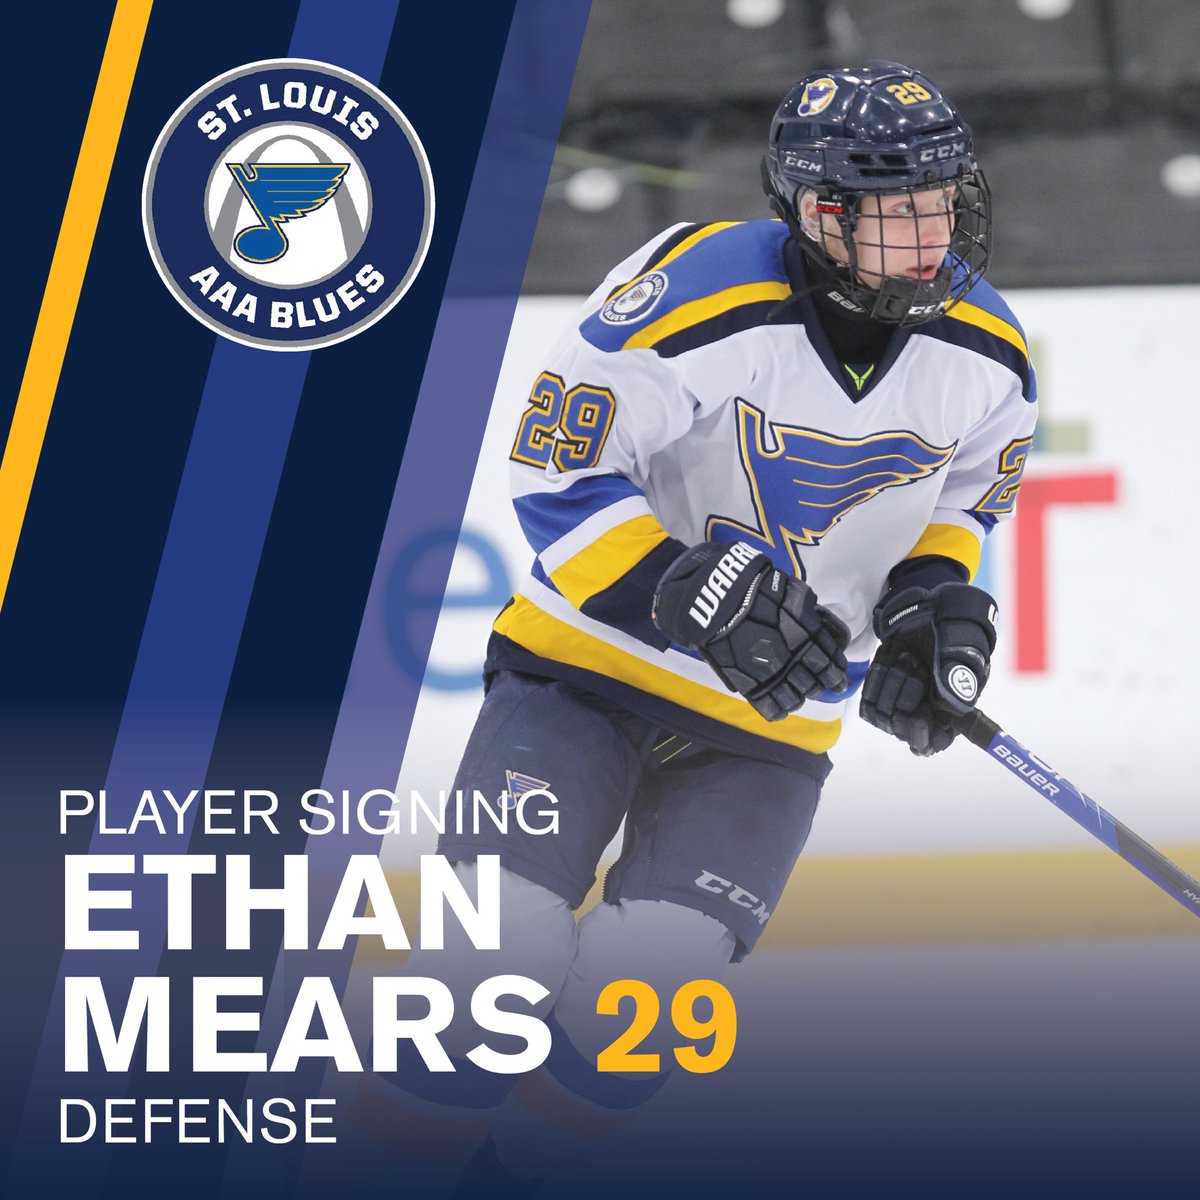 2023-24 Player Signing Announcement: We are excited to welcome back Ethan Mears! Mearsy returns for his 3rd season with @AAABlues #aaahockey #bantamminor